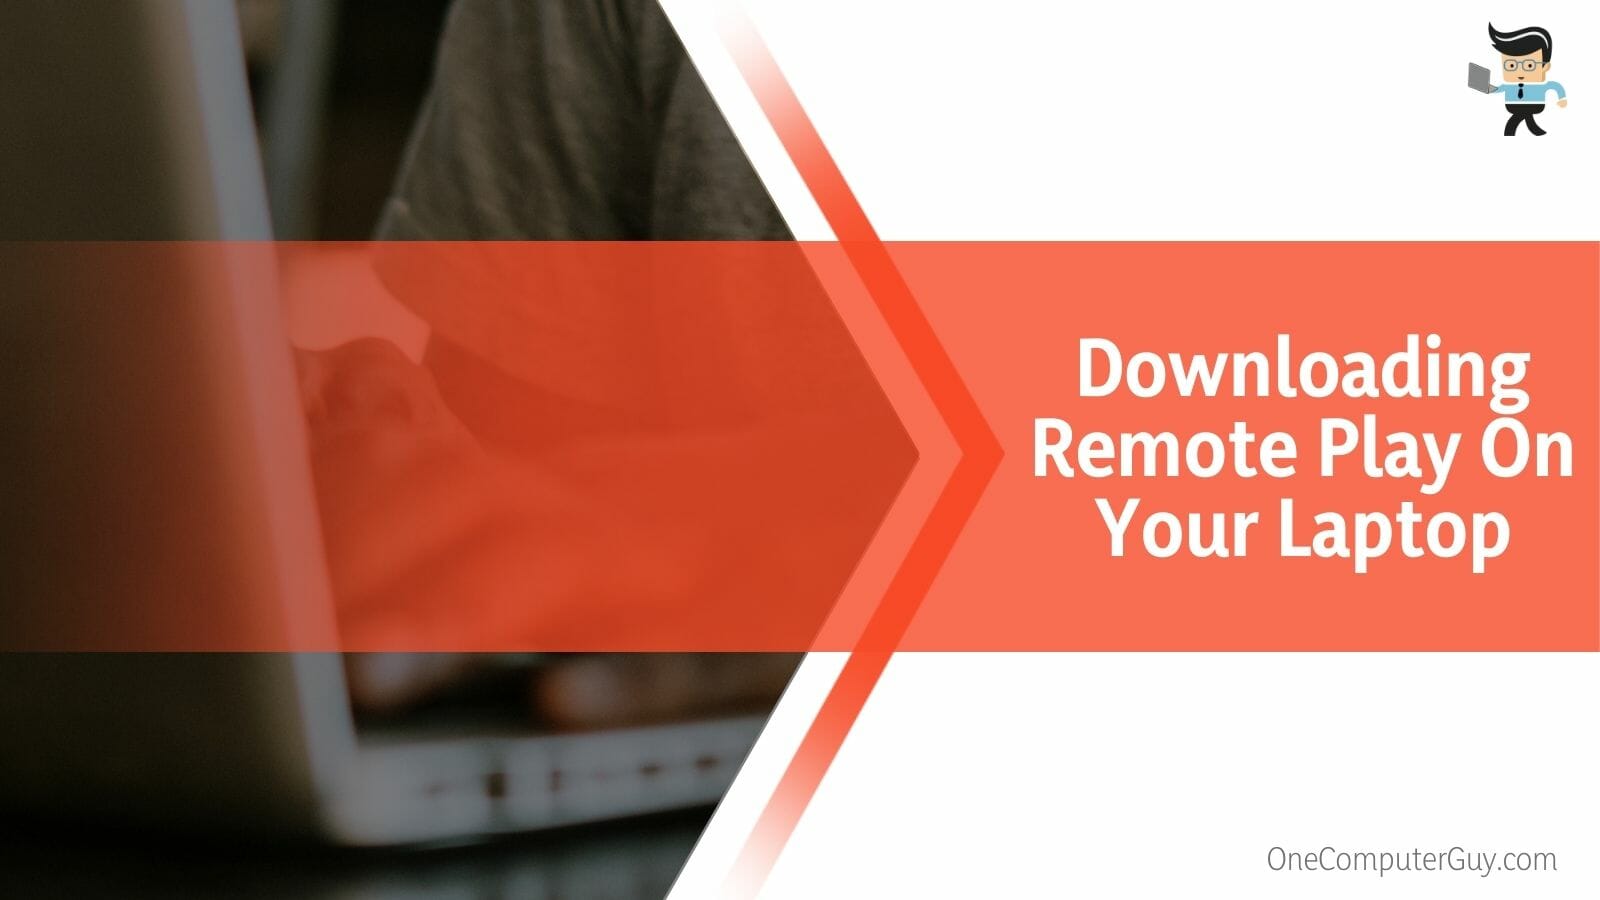 Downloading Remote Play On Your Laptop